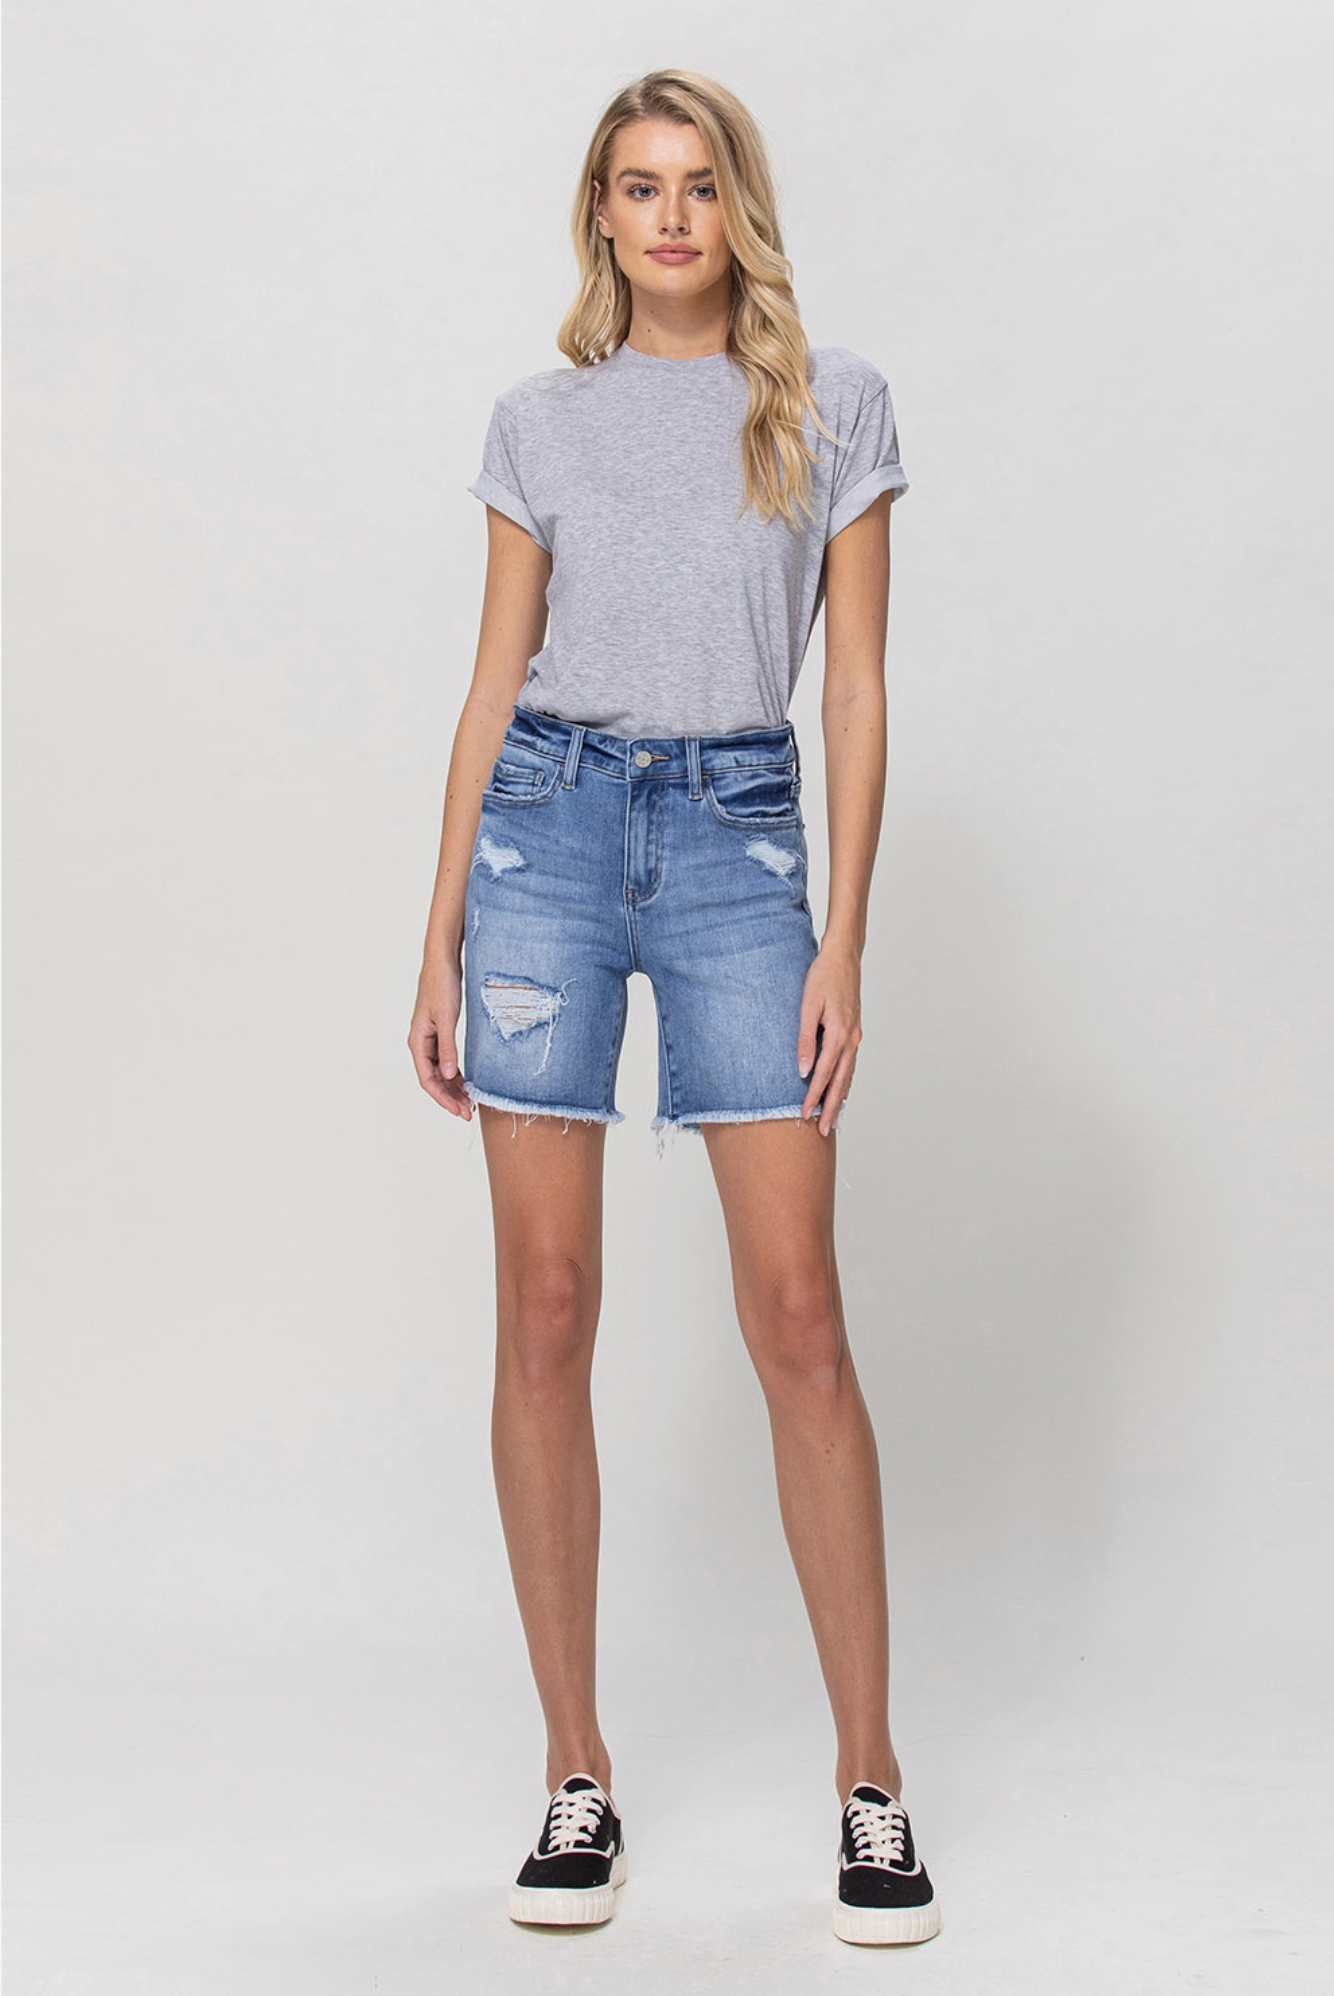 Stretch High Rise Midi Shorts - The Street Boutique 